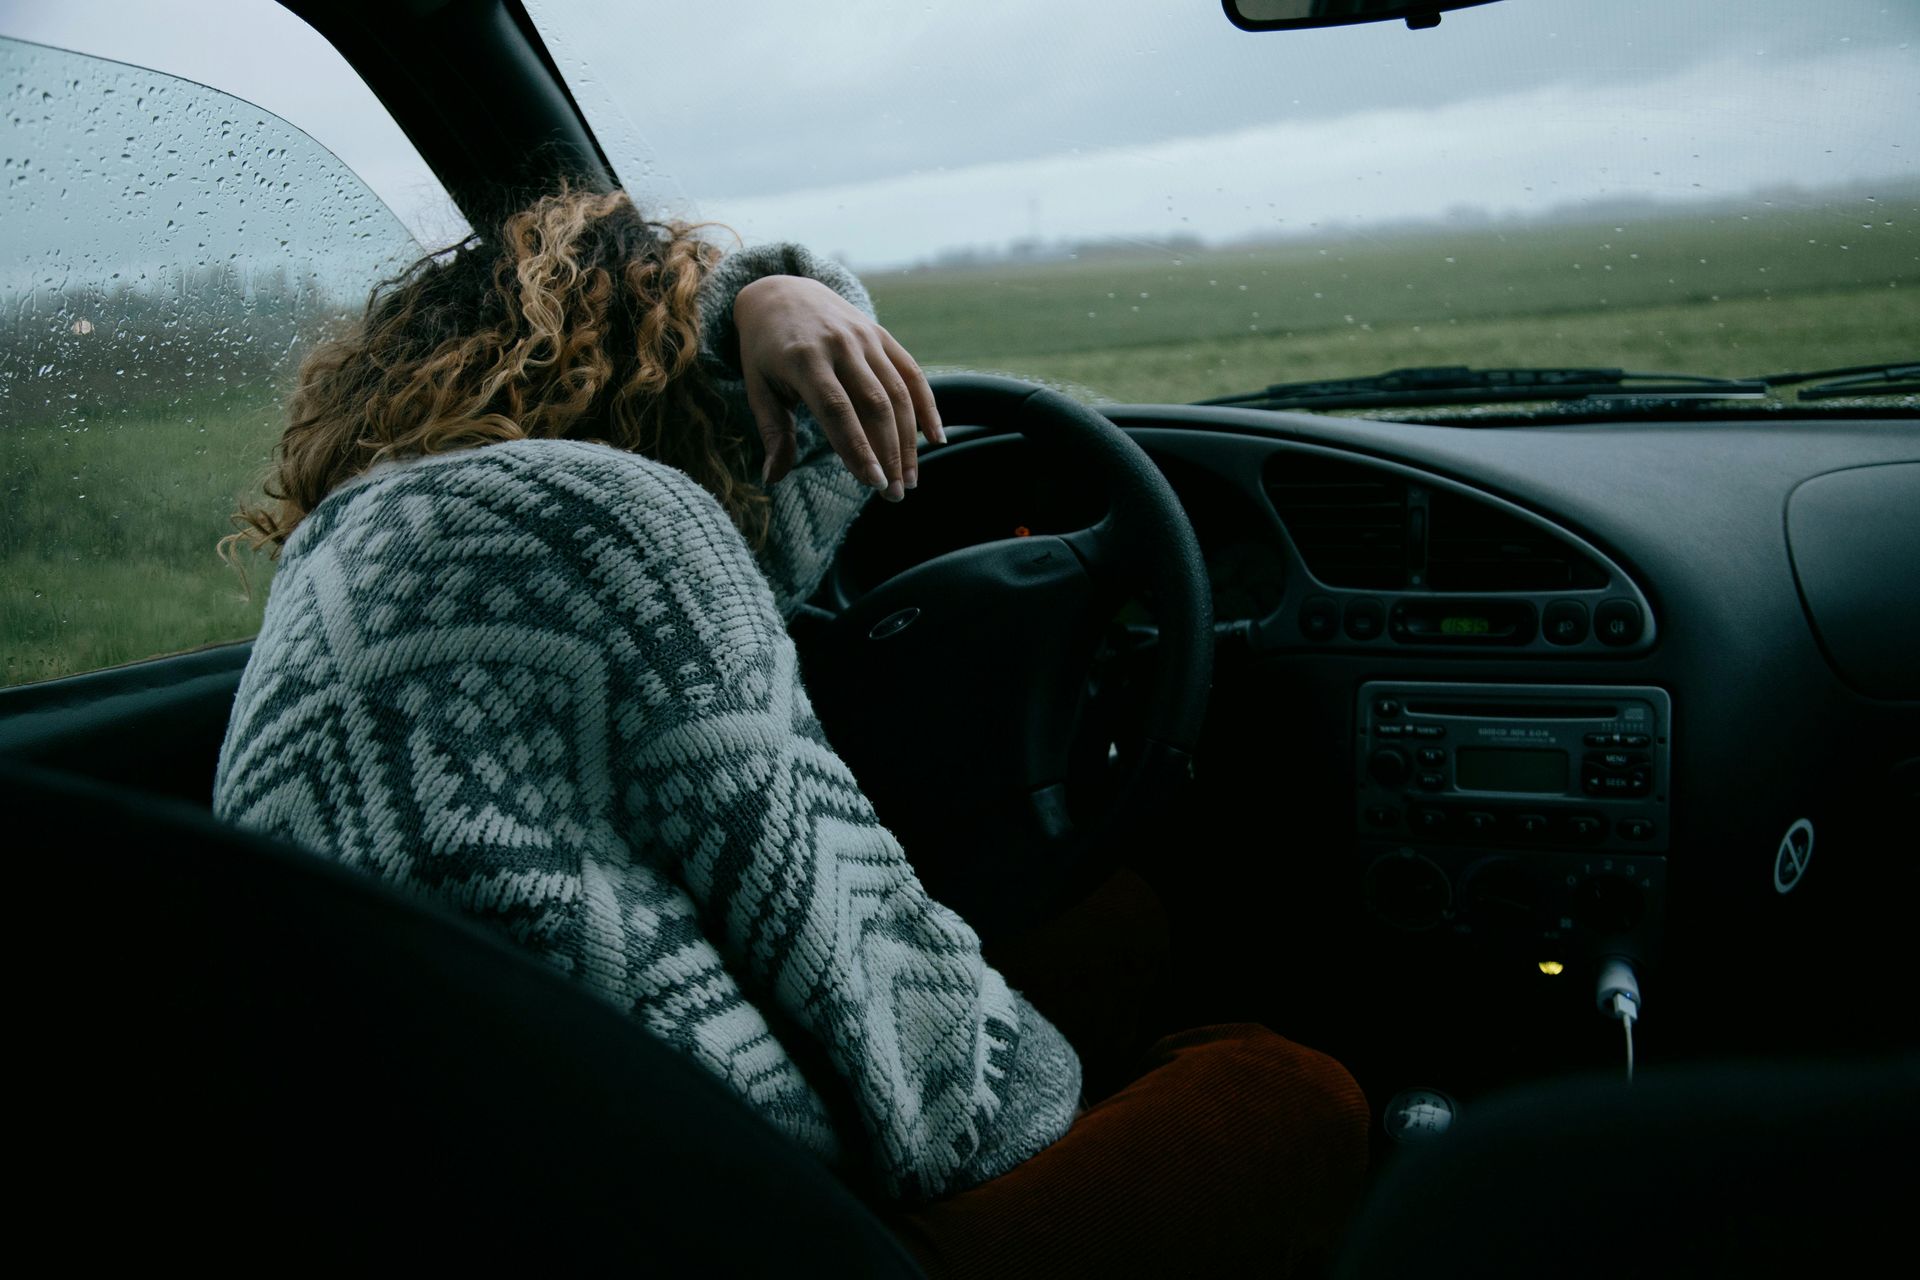 Woman resting head on the steering wheel inside car, showing the increased risk of drowsy driving